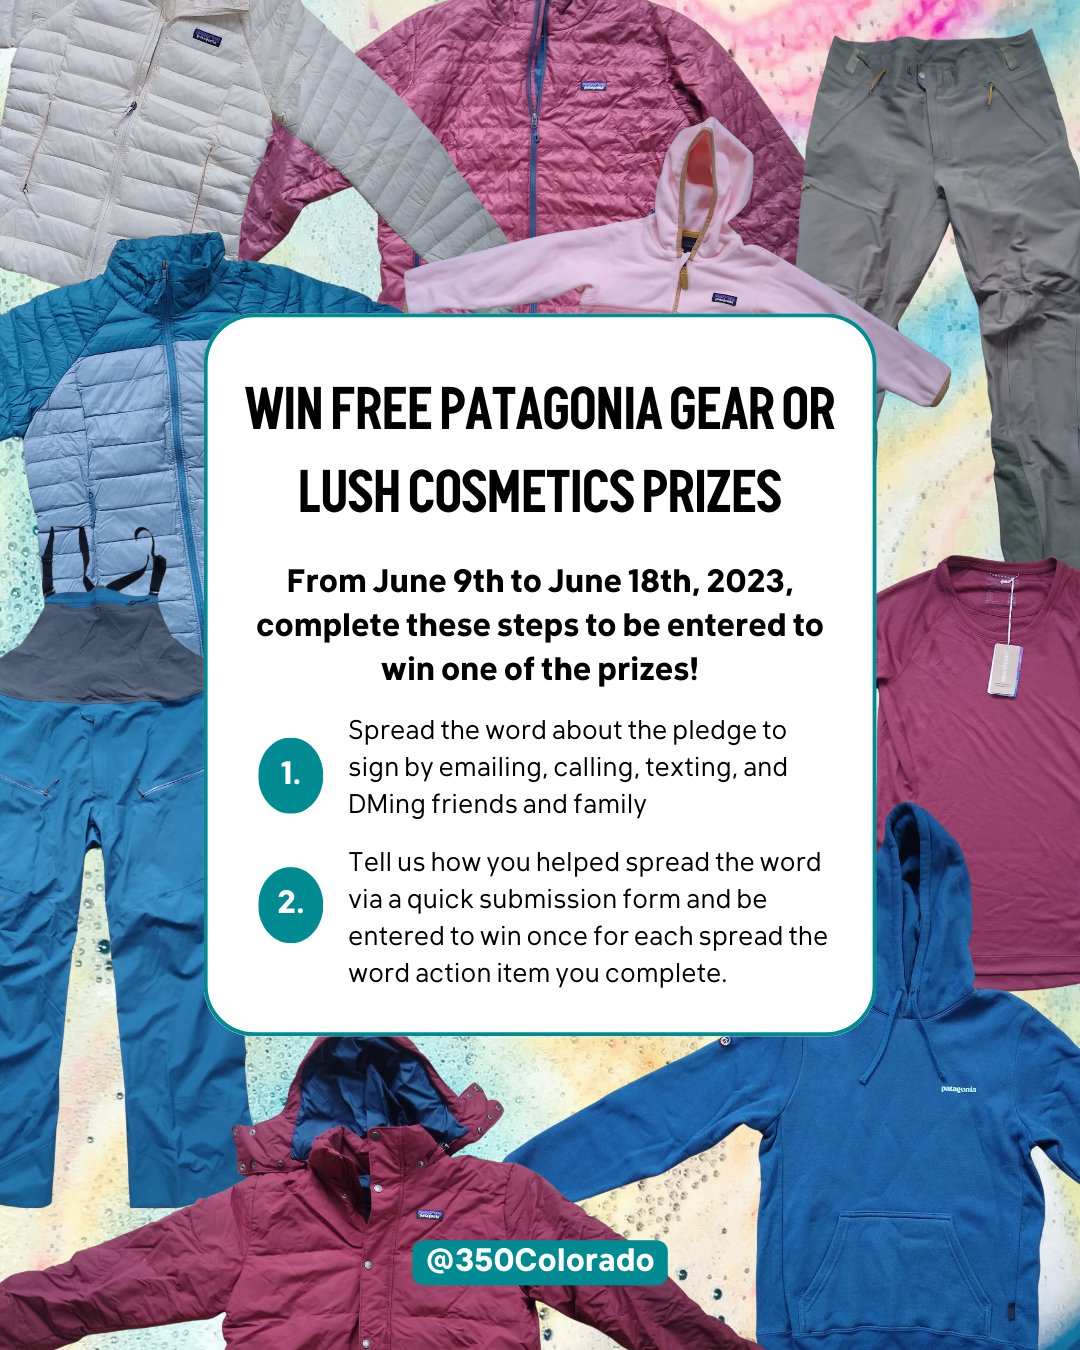 Win free Patagonia gear or Lush cosmetics prizes by spreading the word about the pledge to sign